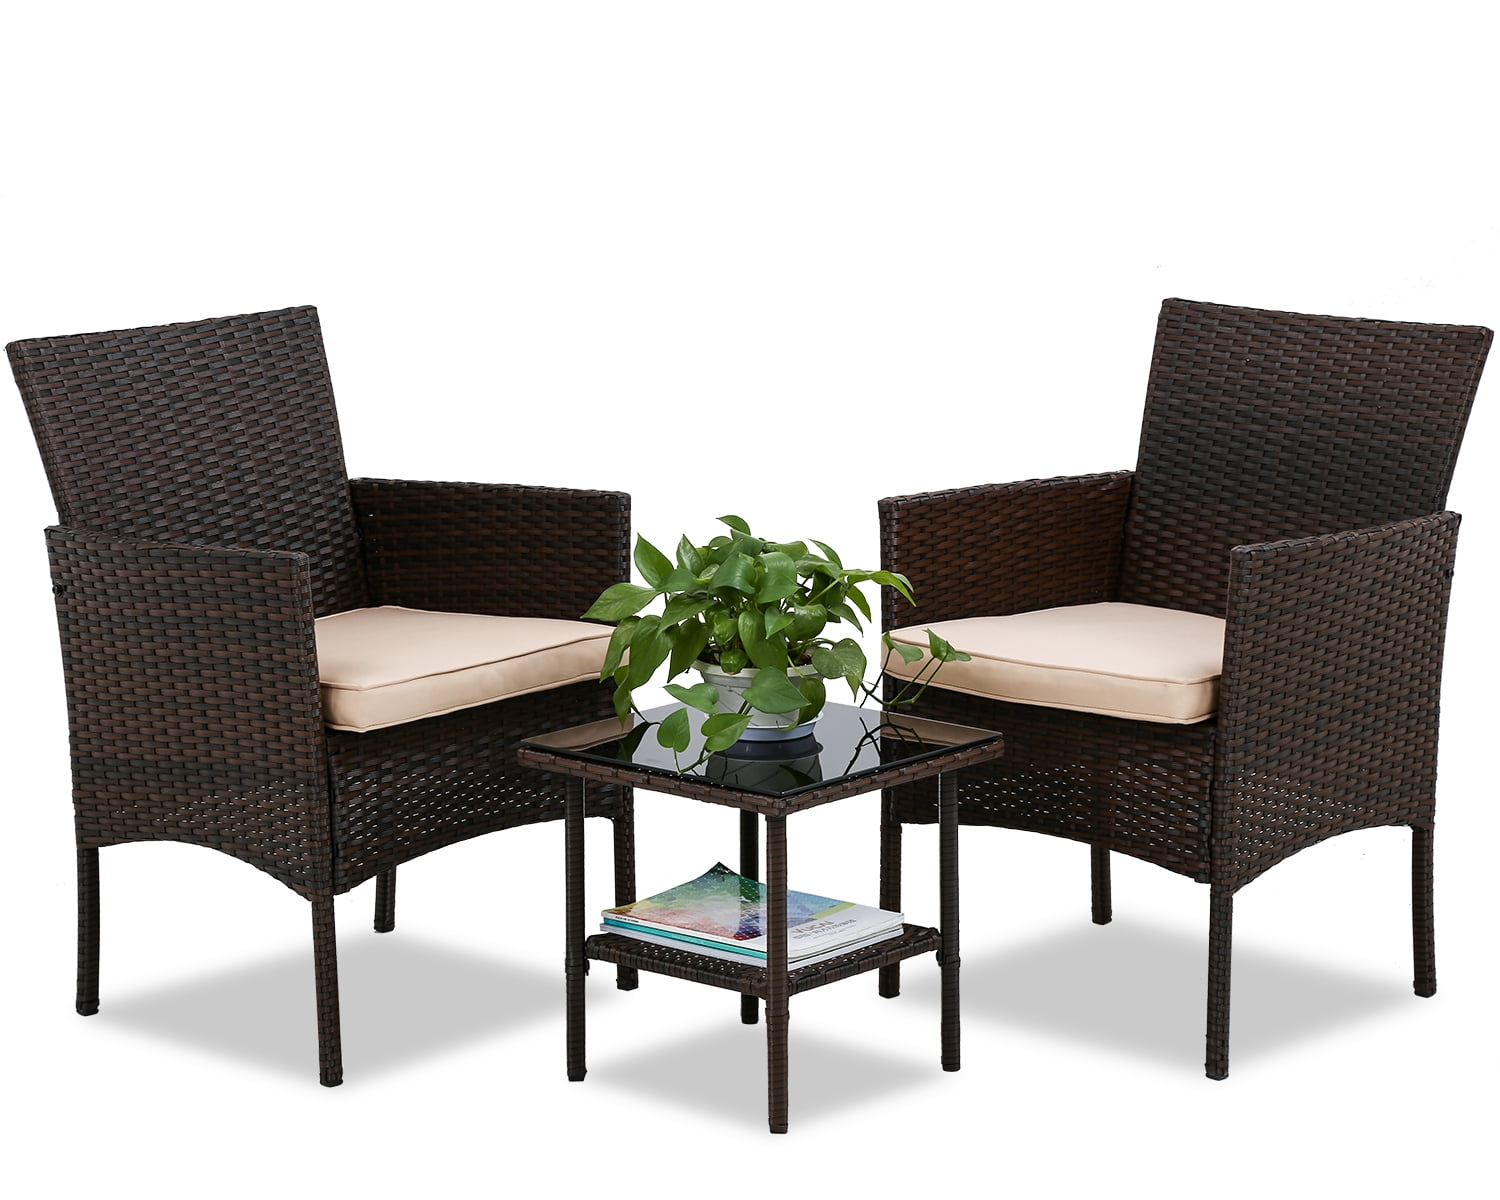 Patio Porch Furniture Sets 3 Pieces PE Rattan Wicker Chairs with Table Outdoor 